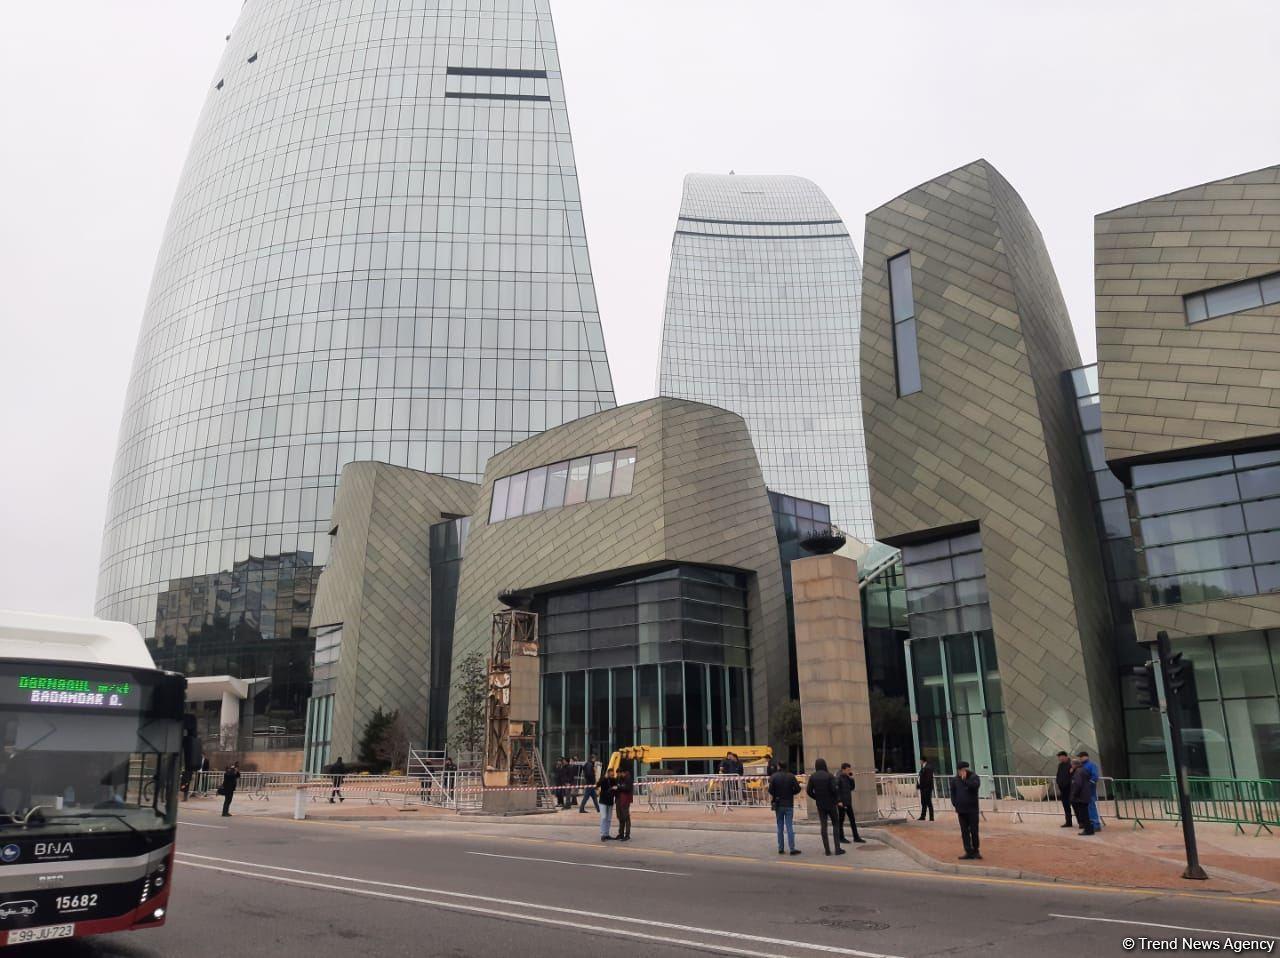 Explosion occurs in front of Flame Towers in Baku [PHOTO/VIDEO]